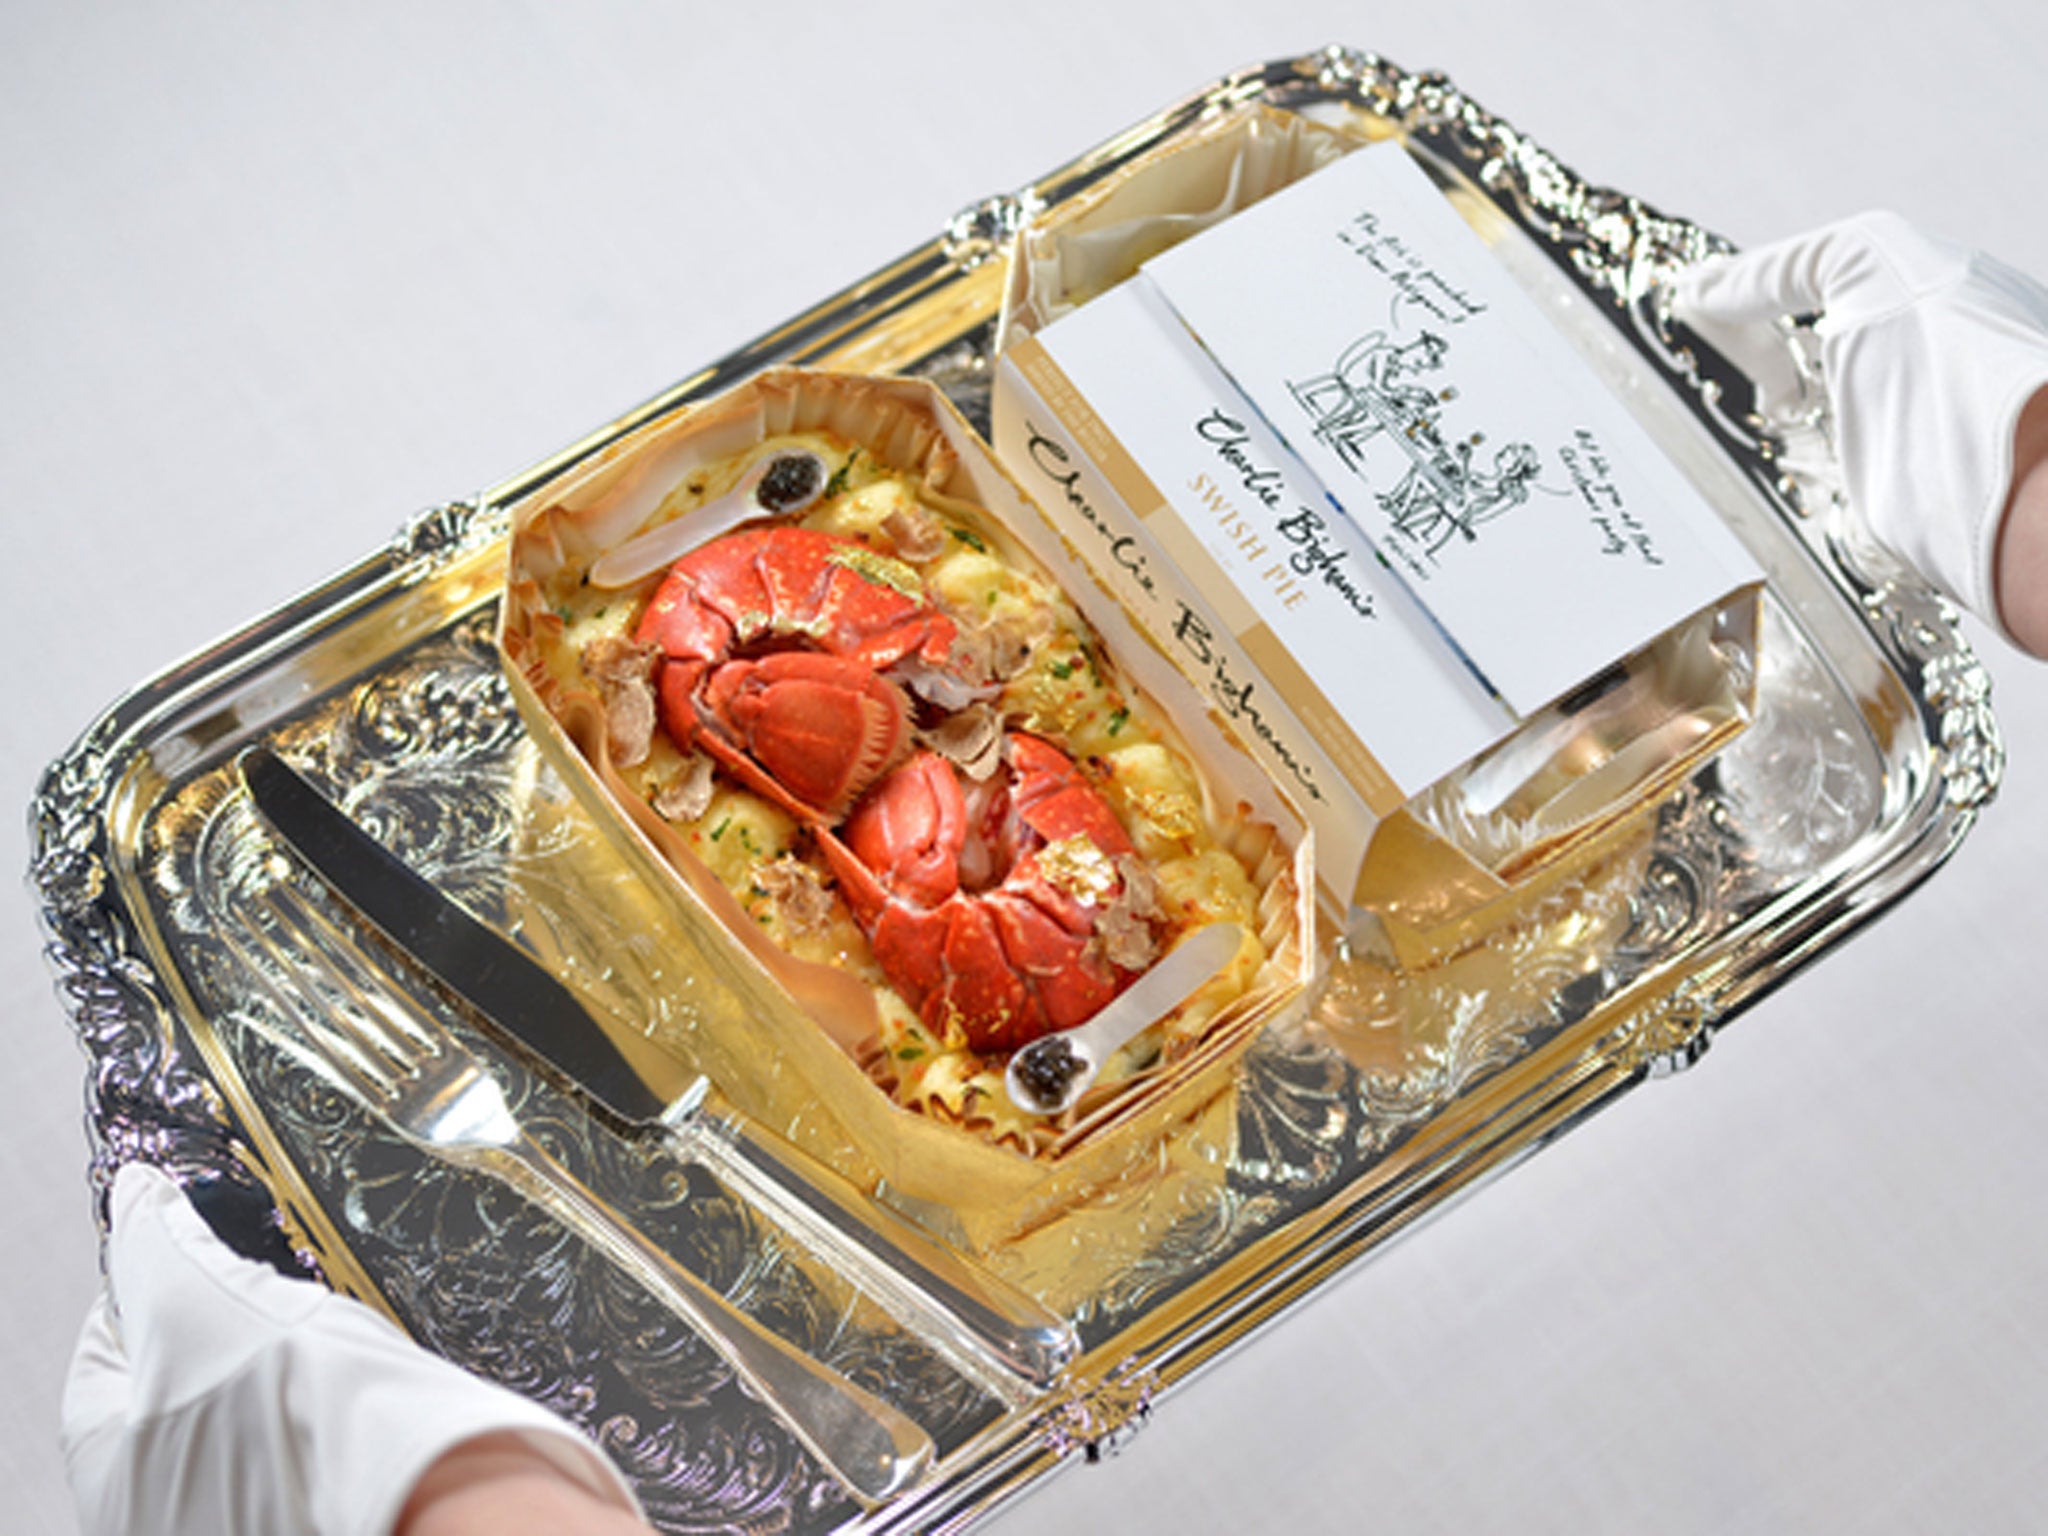 The Swish Pie costs more than ?314 and is made with lobster, caviar and champagne